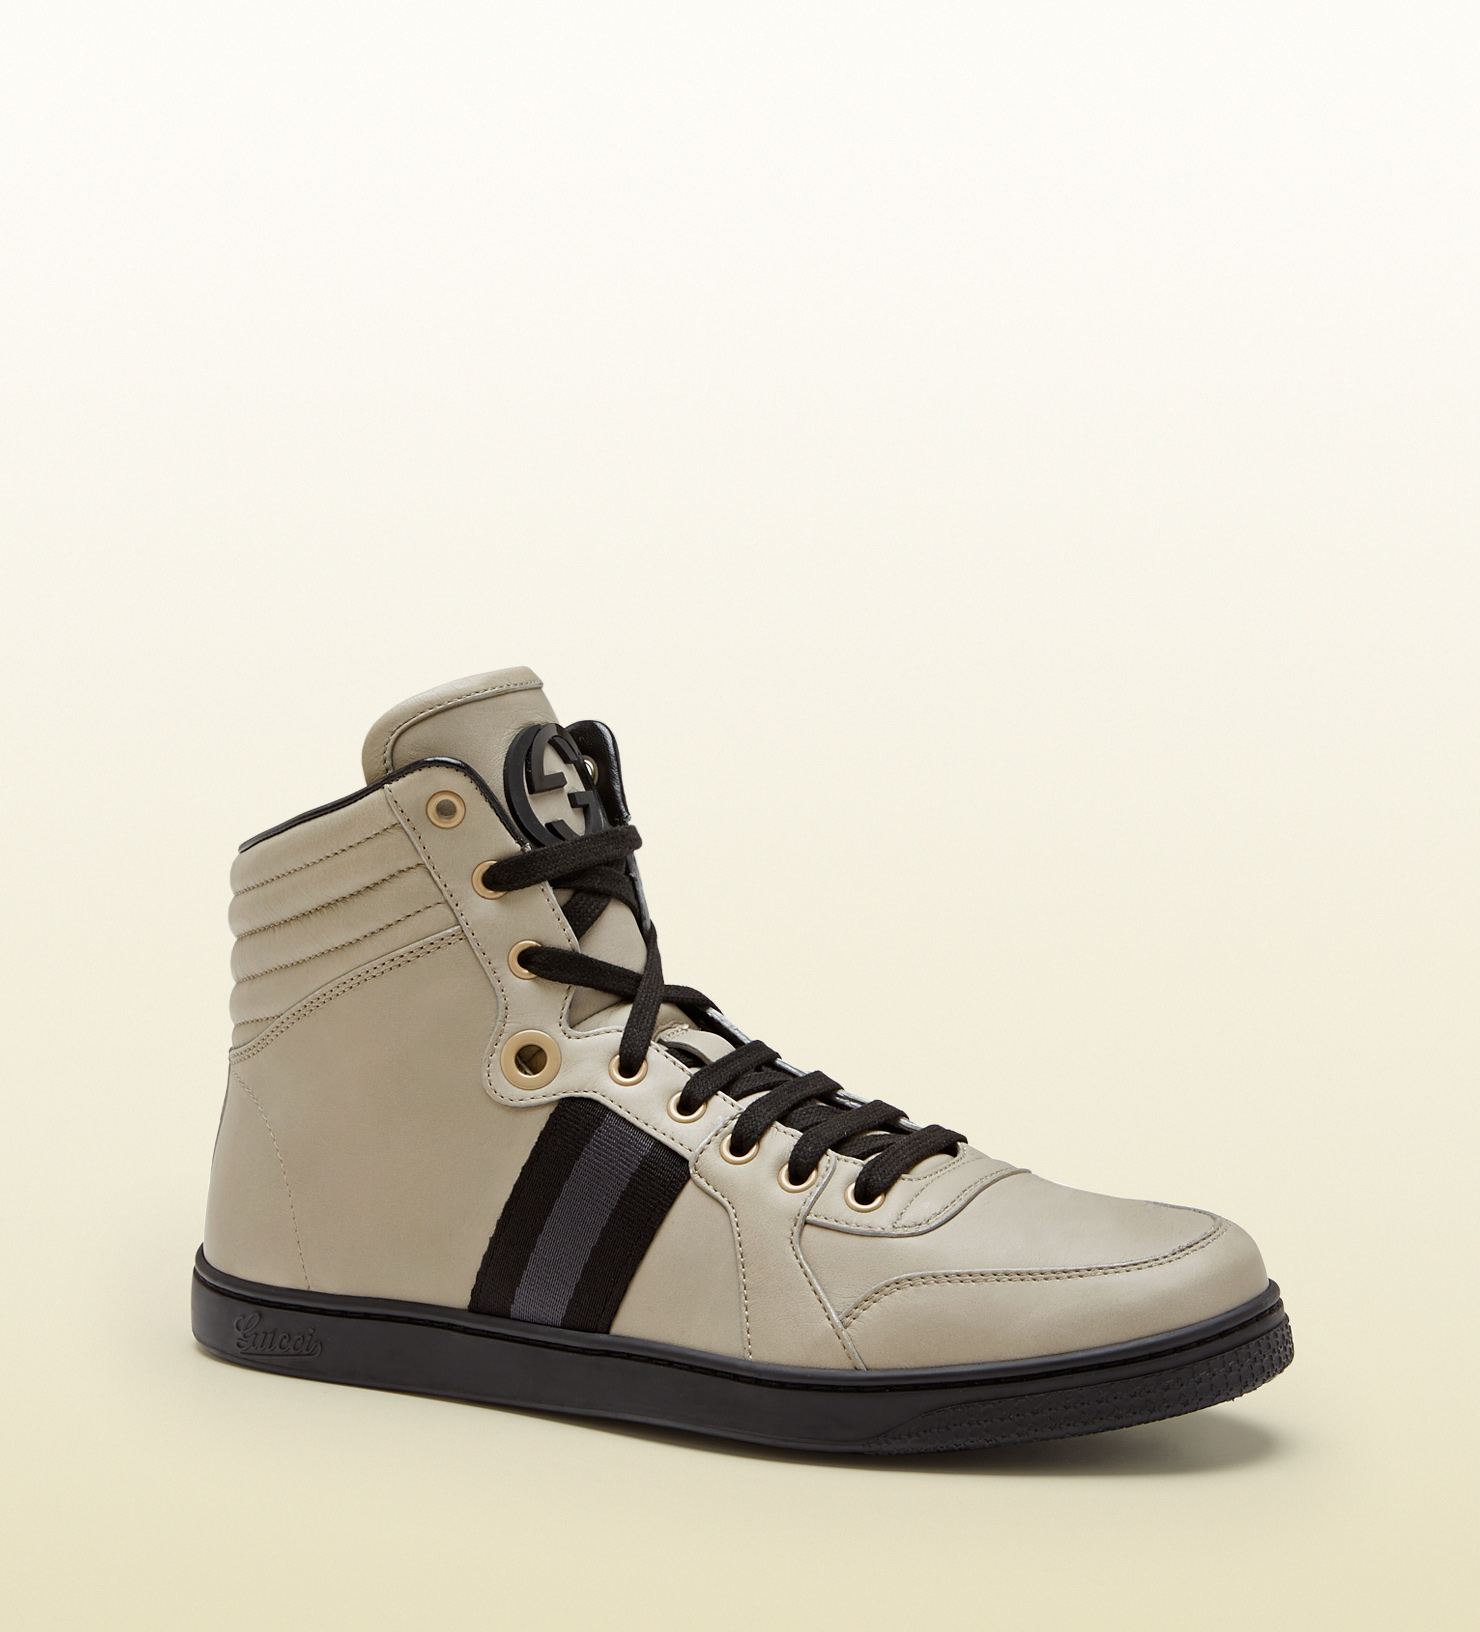 Lyst - Gucci Men's High-top Sneaker From Viaggio Collection in Gray for Men